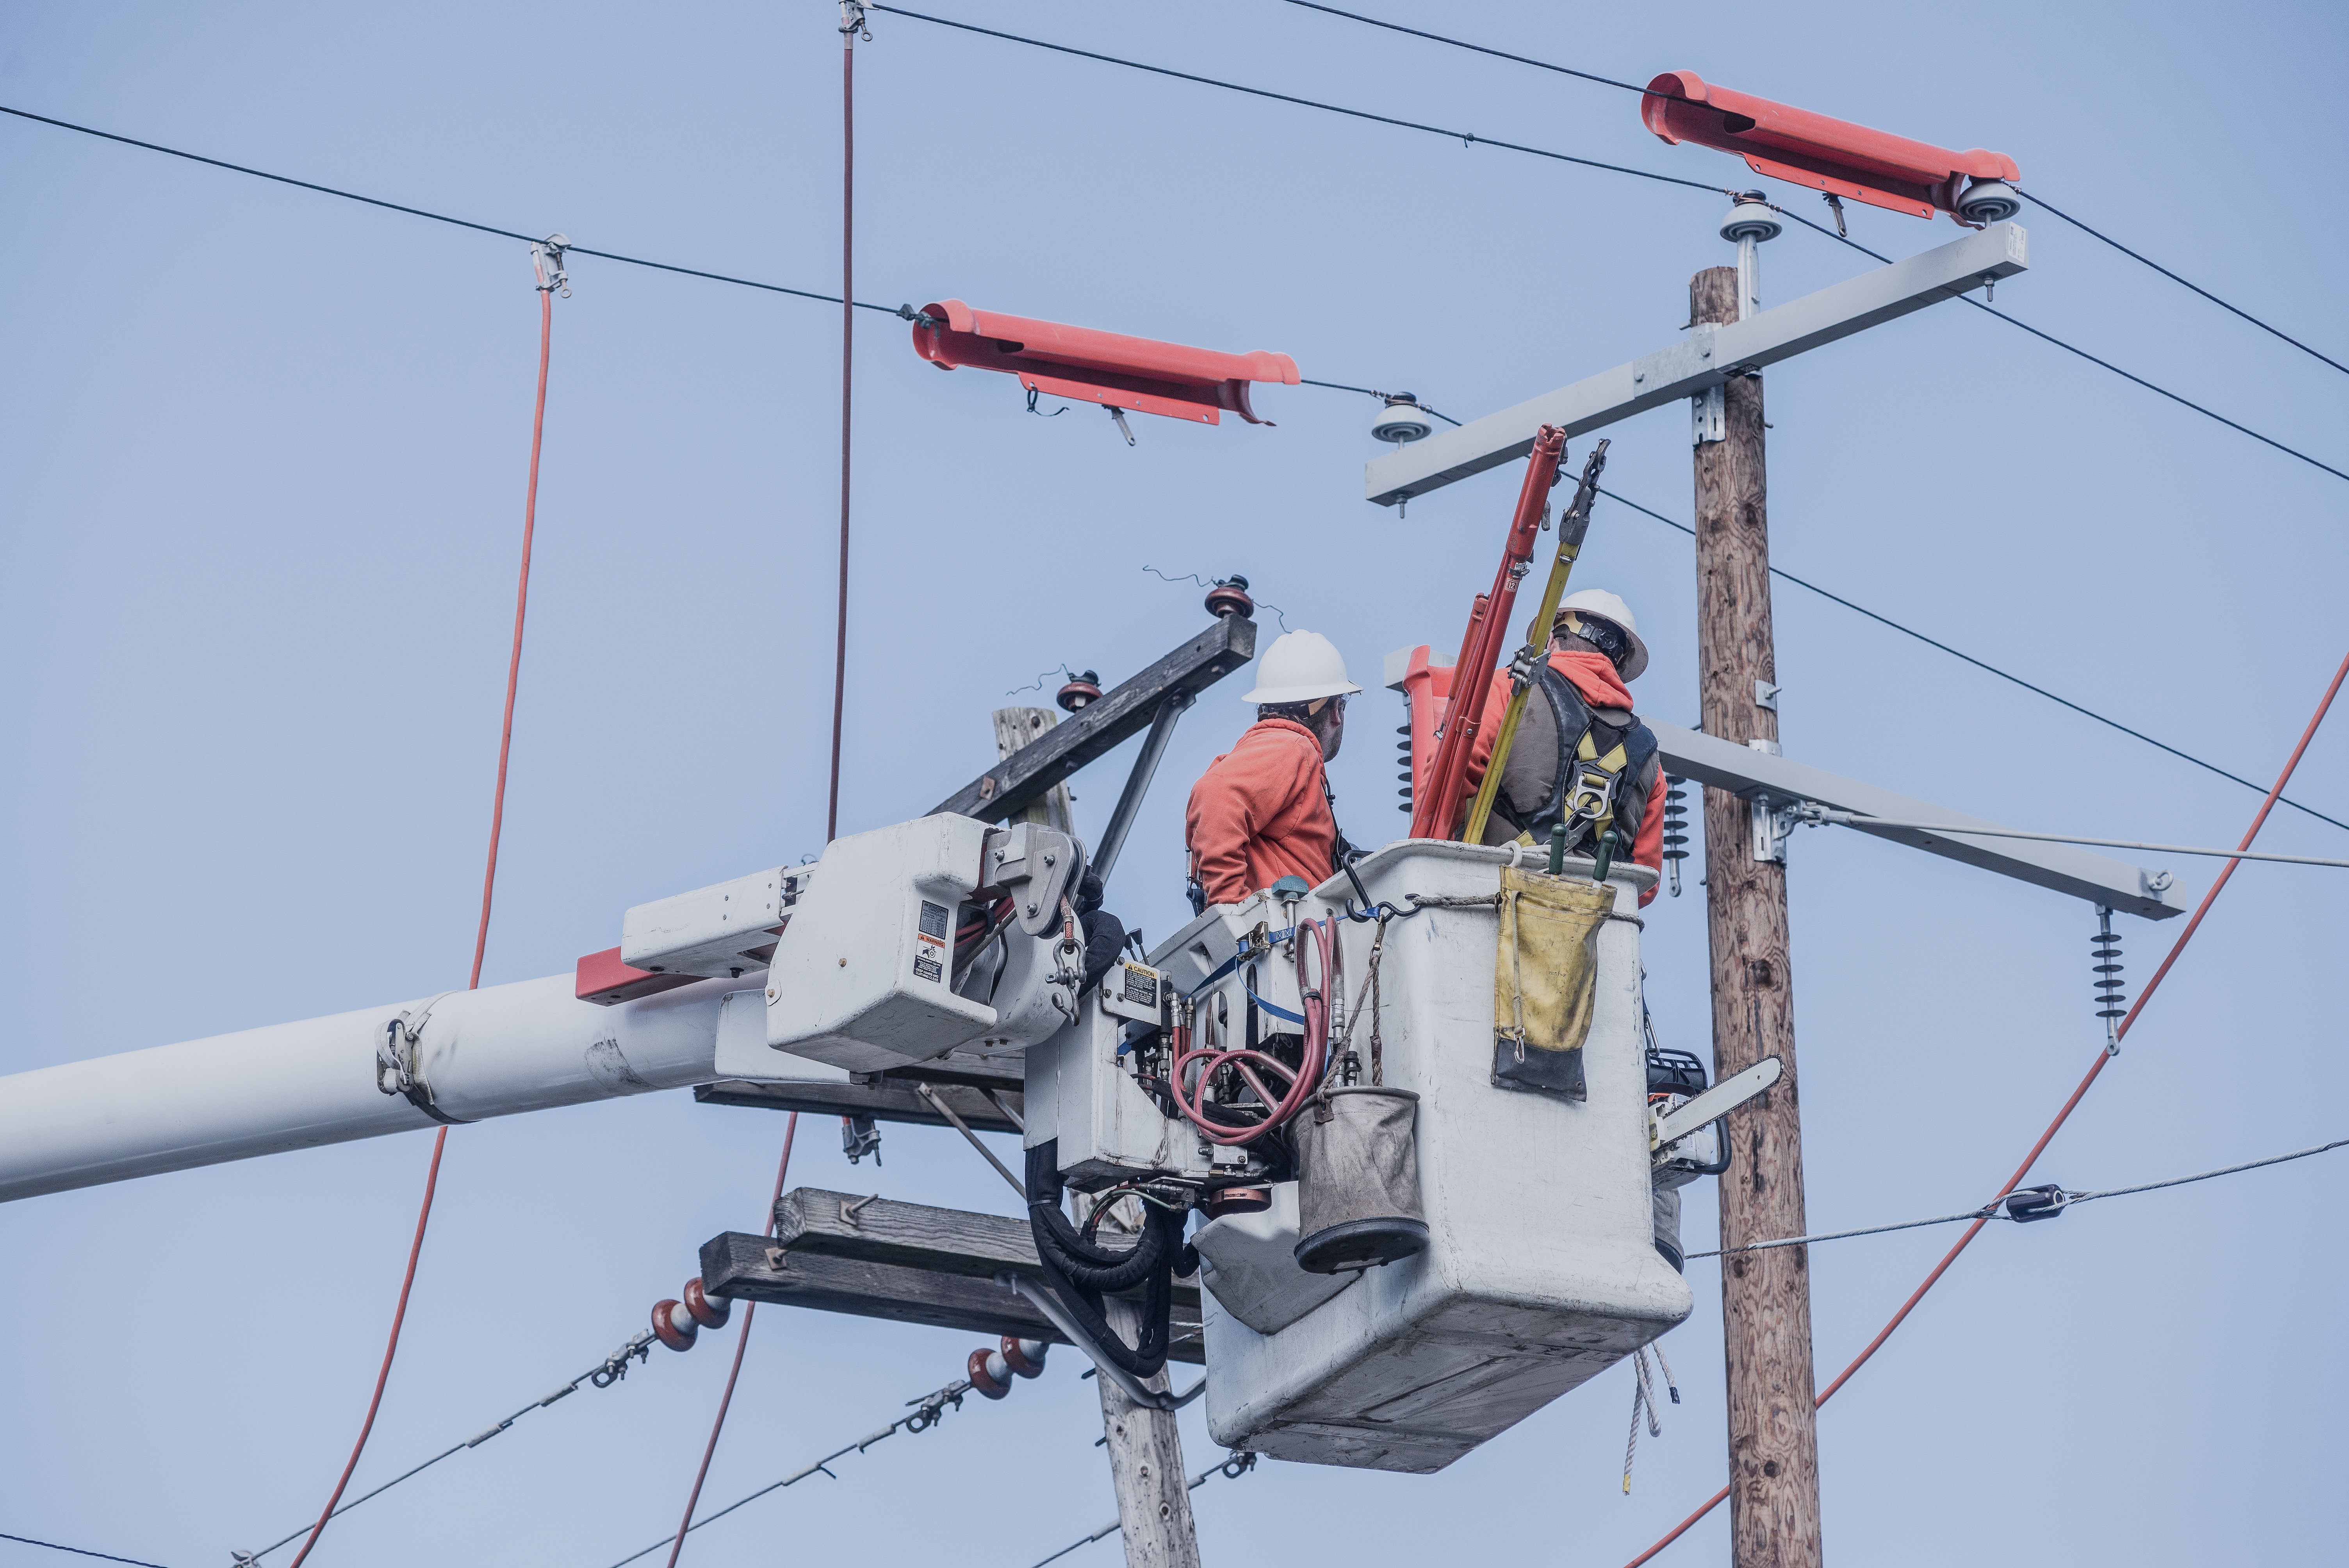 Featured image for the blog post - Safely Working Around Power Lines is as Important as Your Morning Coffee